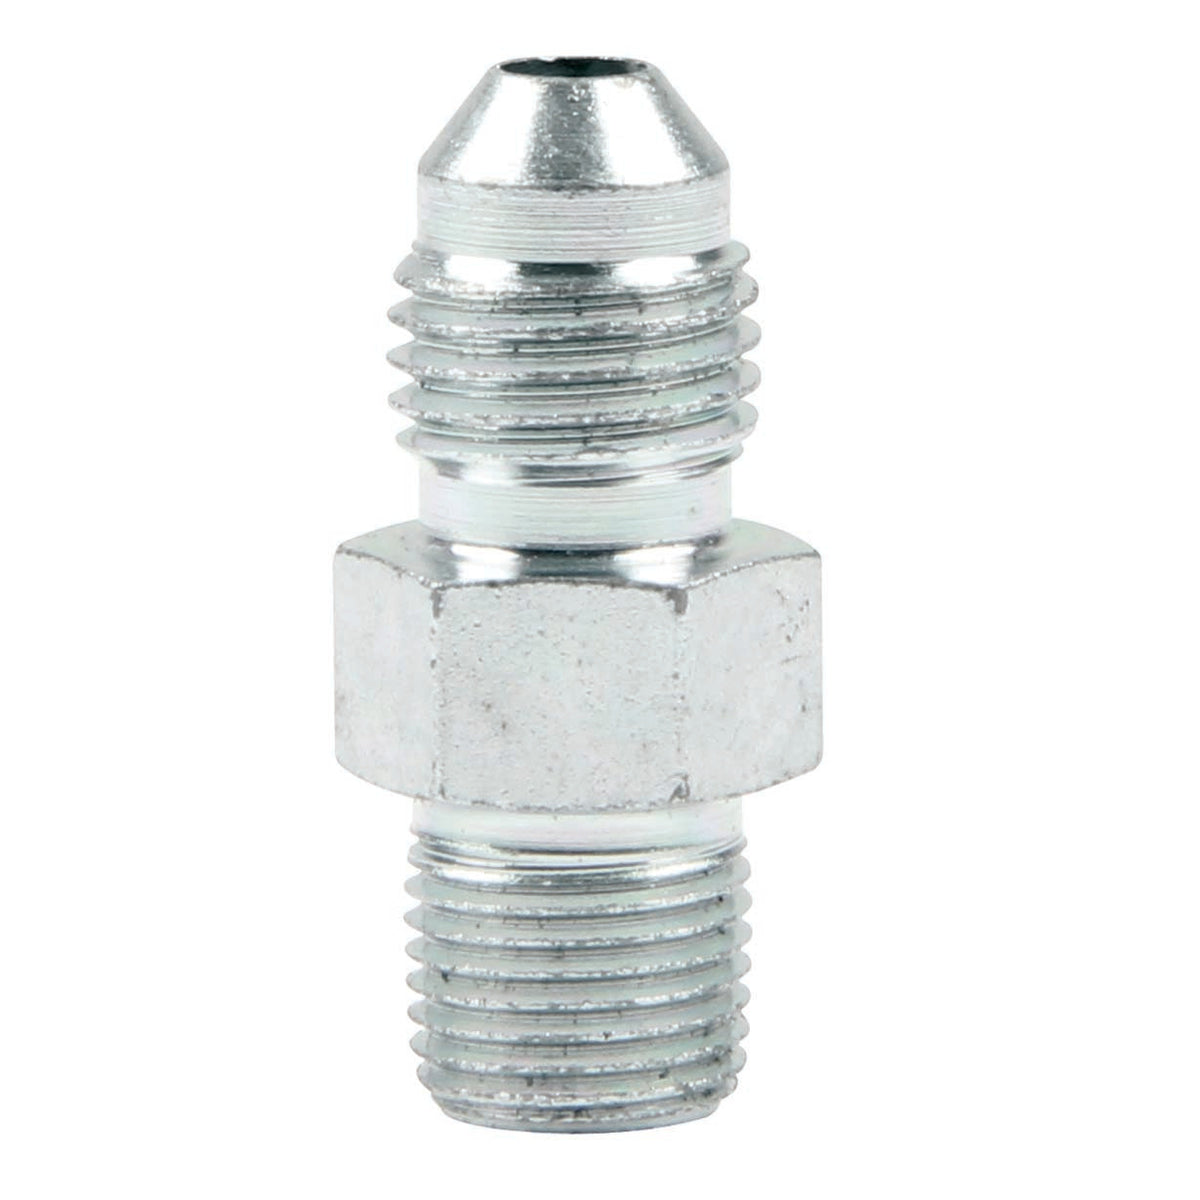 Adapter Fittings -4 to 1/8 NPT 2pk